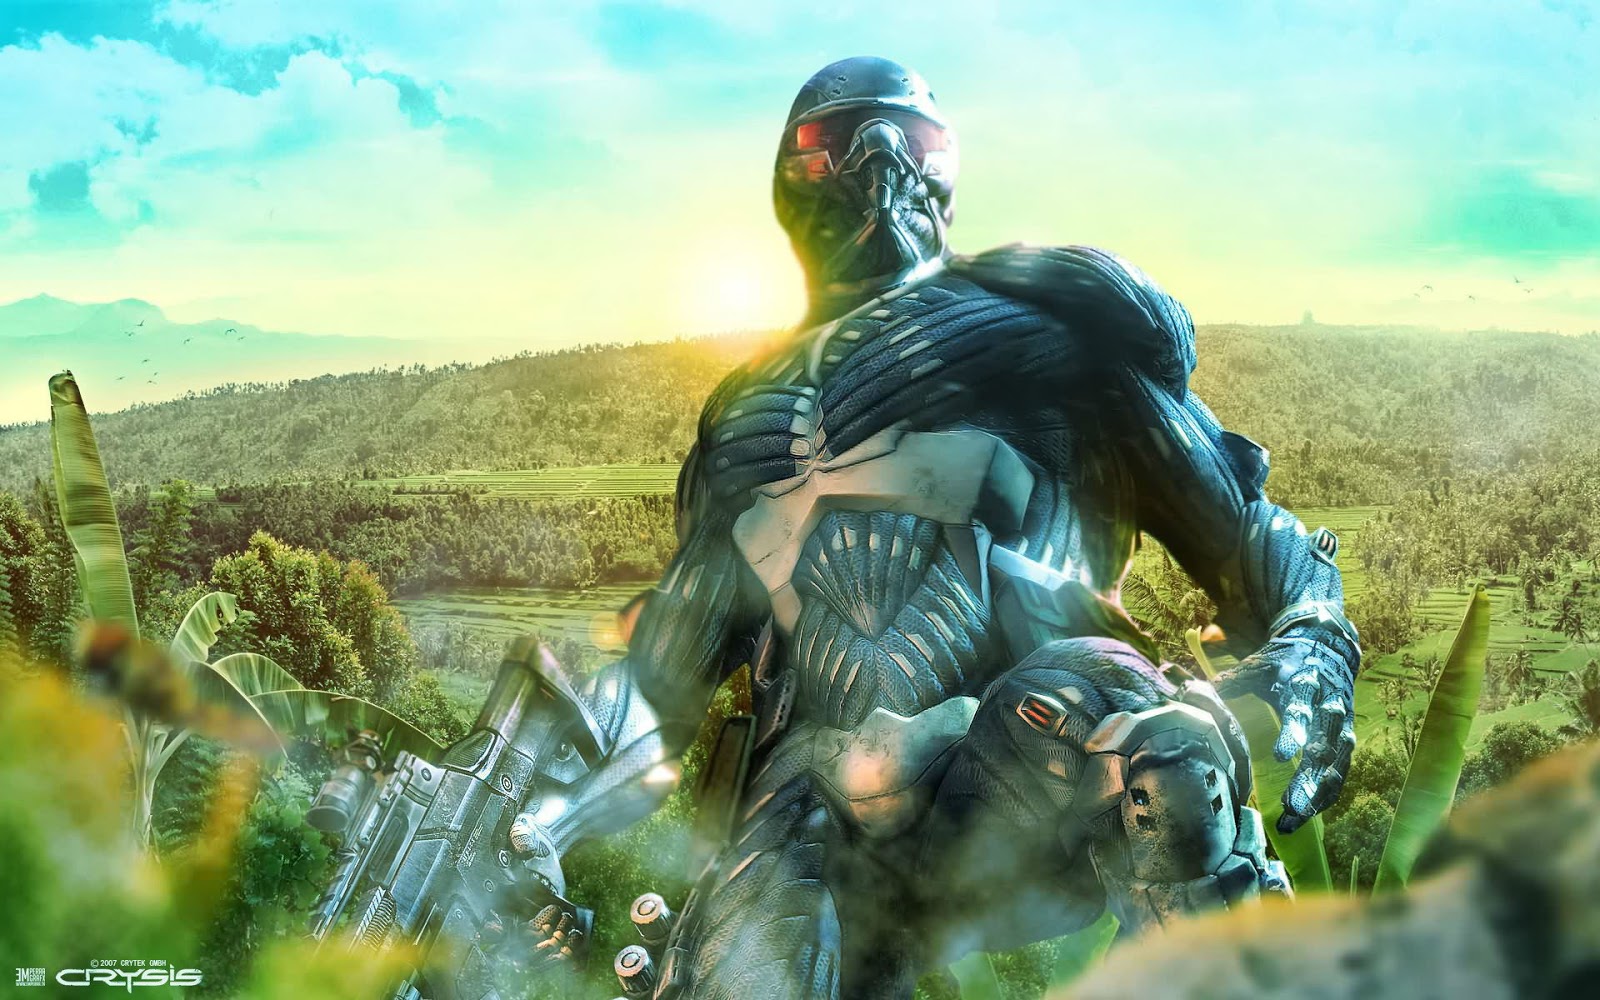 crysis hd wallpapers,action adventure game,pc game,games,adventure game,cg artwork